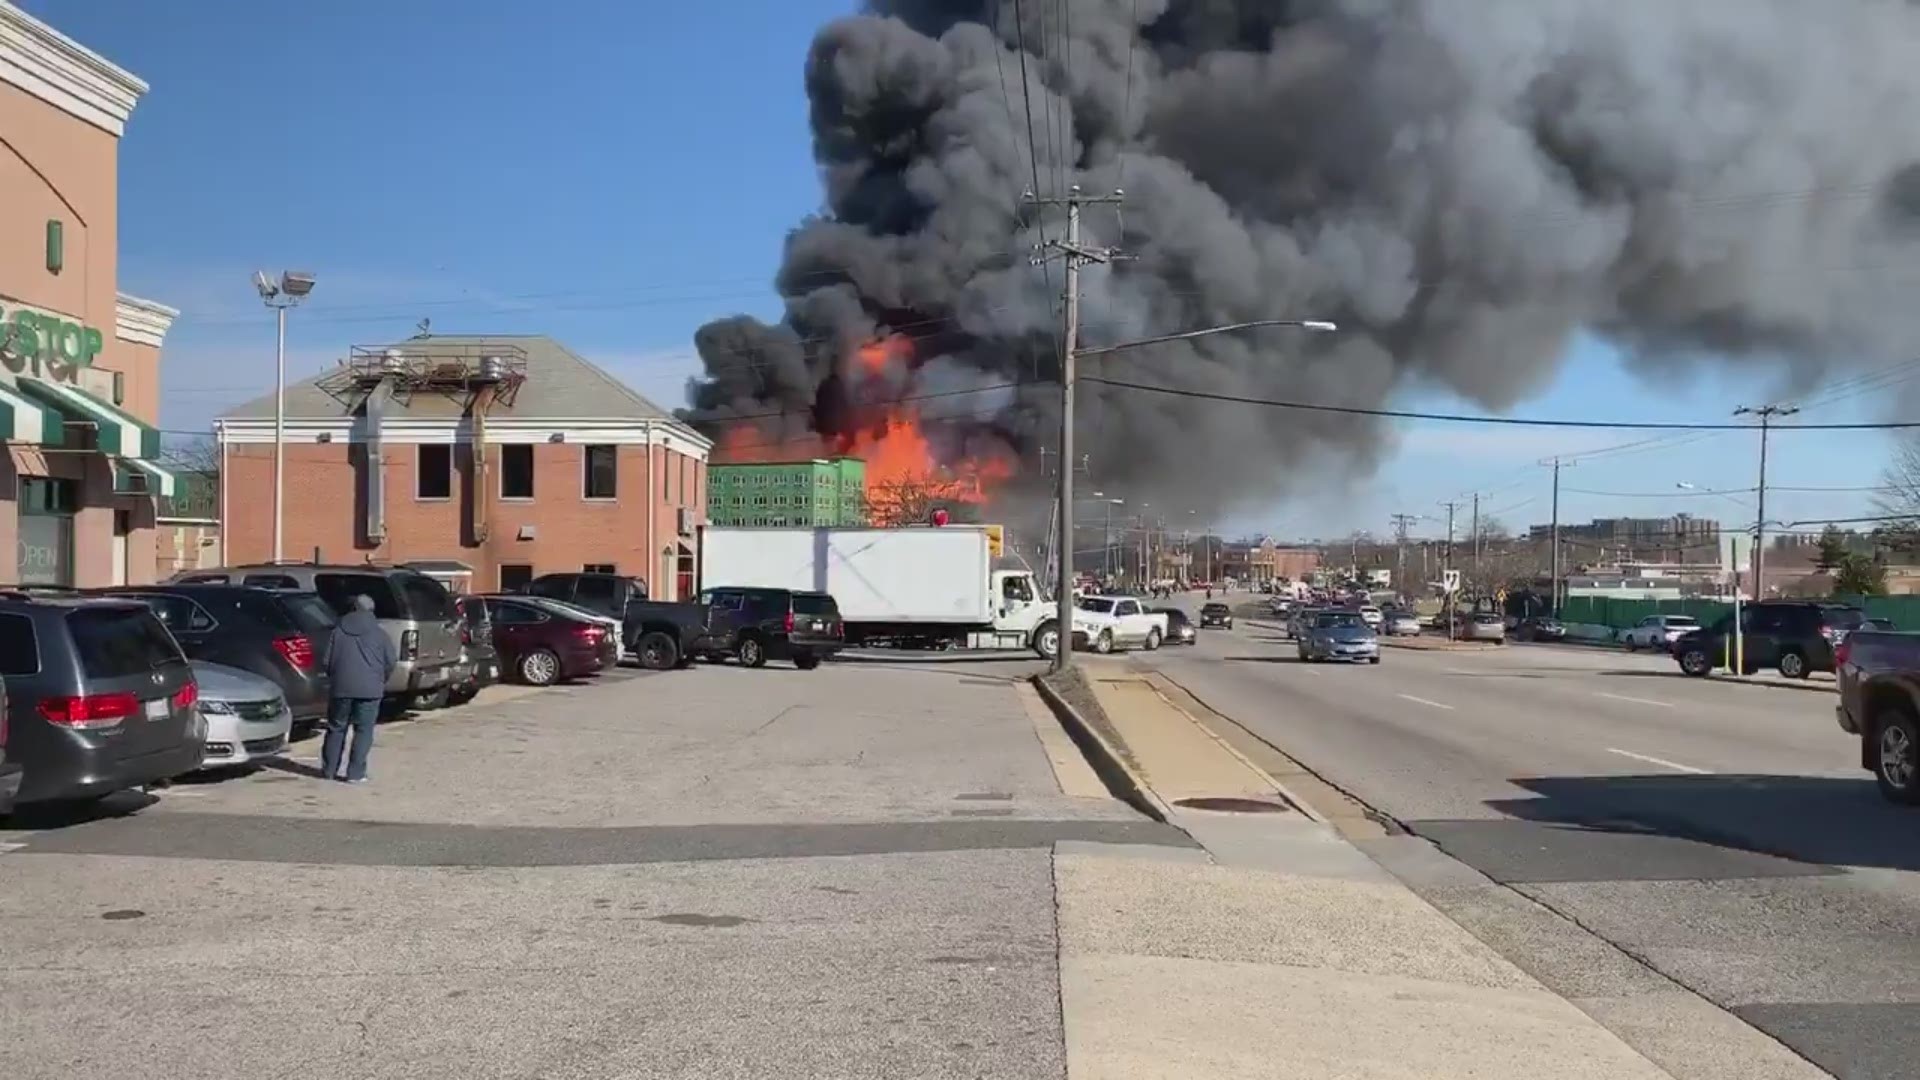 No firefighter or civilian injuries have been reported in the fire of the five-story building.